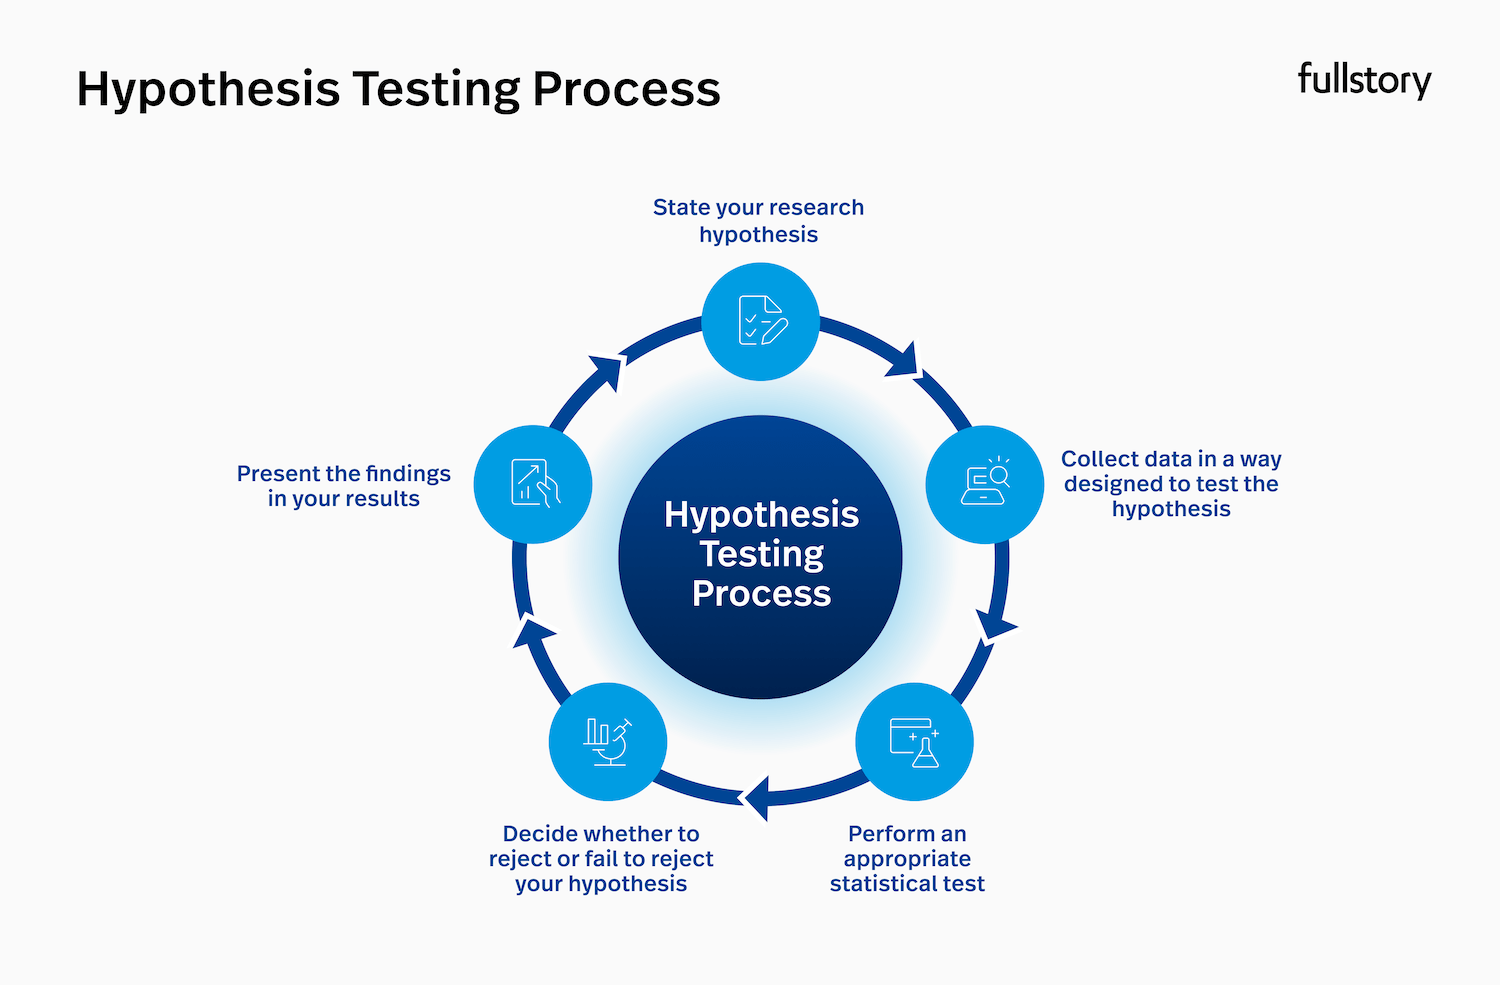 Hypothesis testing process